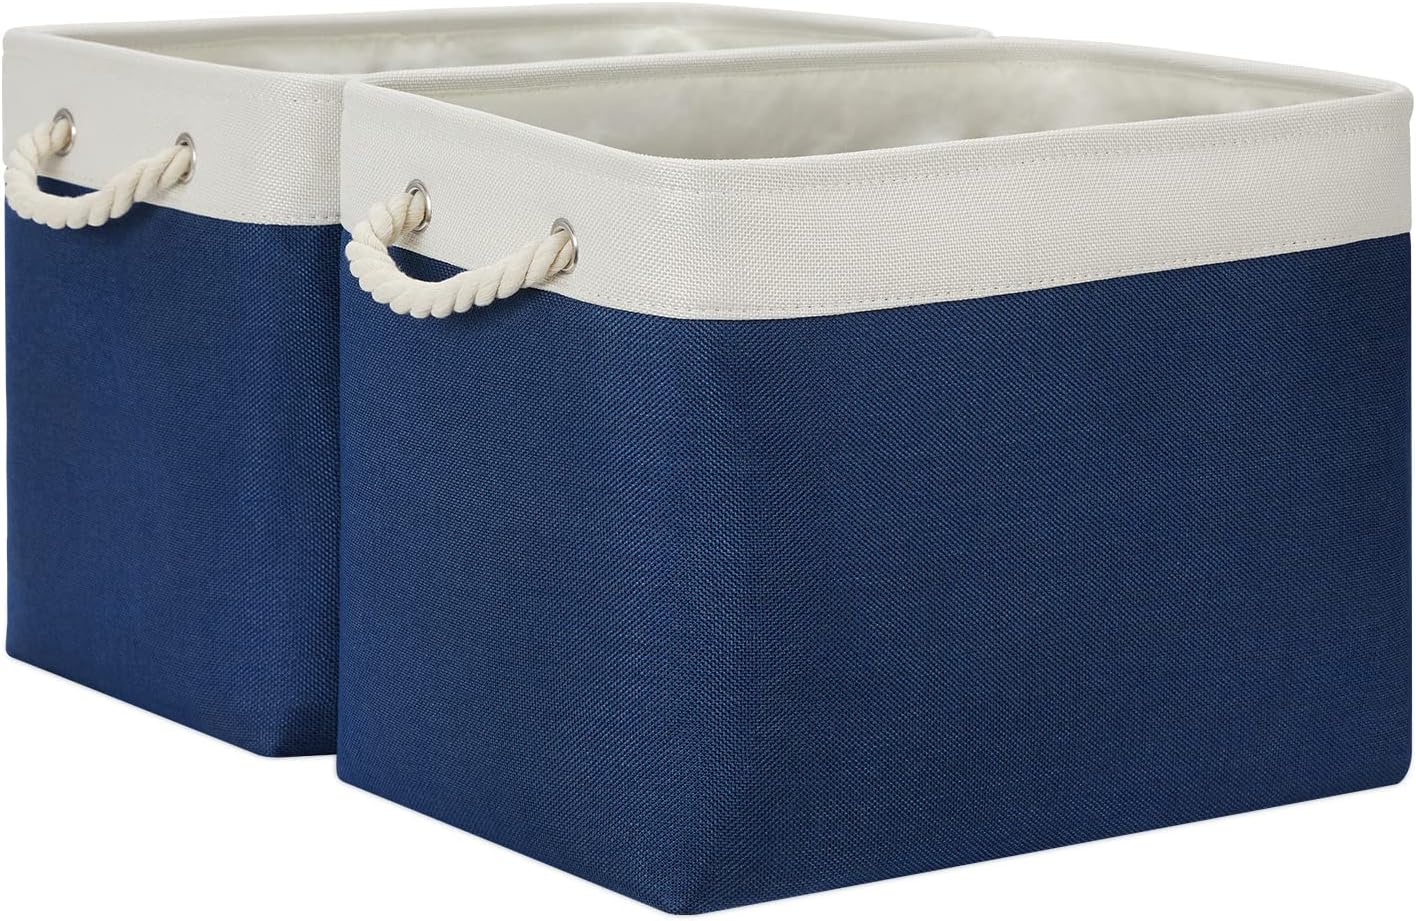 Temary Storage Baskets for Shelves, 2 Pcs Fabric Storage Bins Empty Gift Baskets for Organizing Clothes, Toys, Books, Decorative Basket with Rope Handles (White&Blue,16Lx12Wx12H Inches)